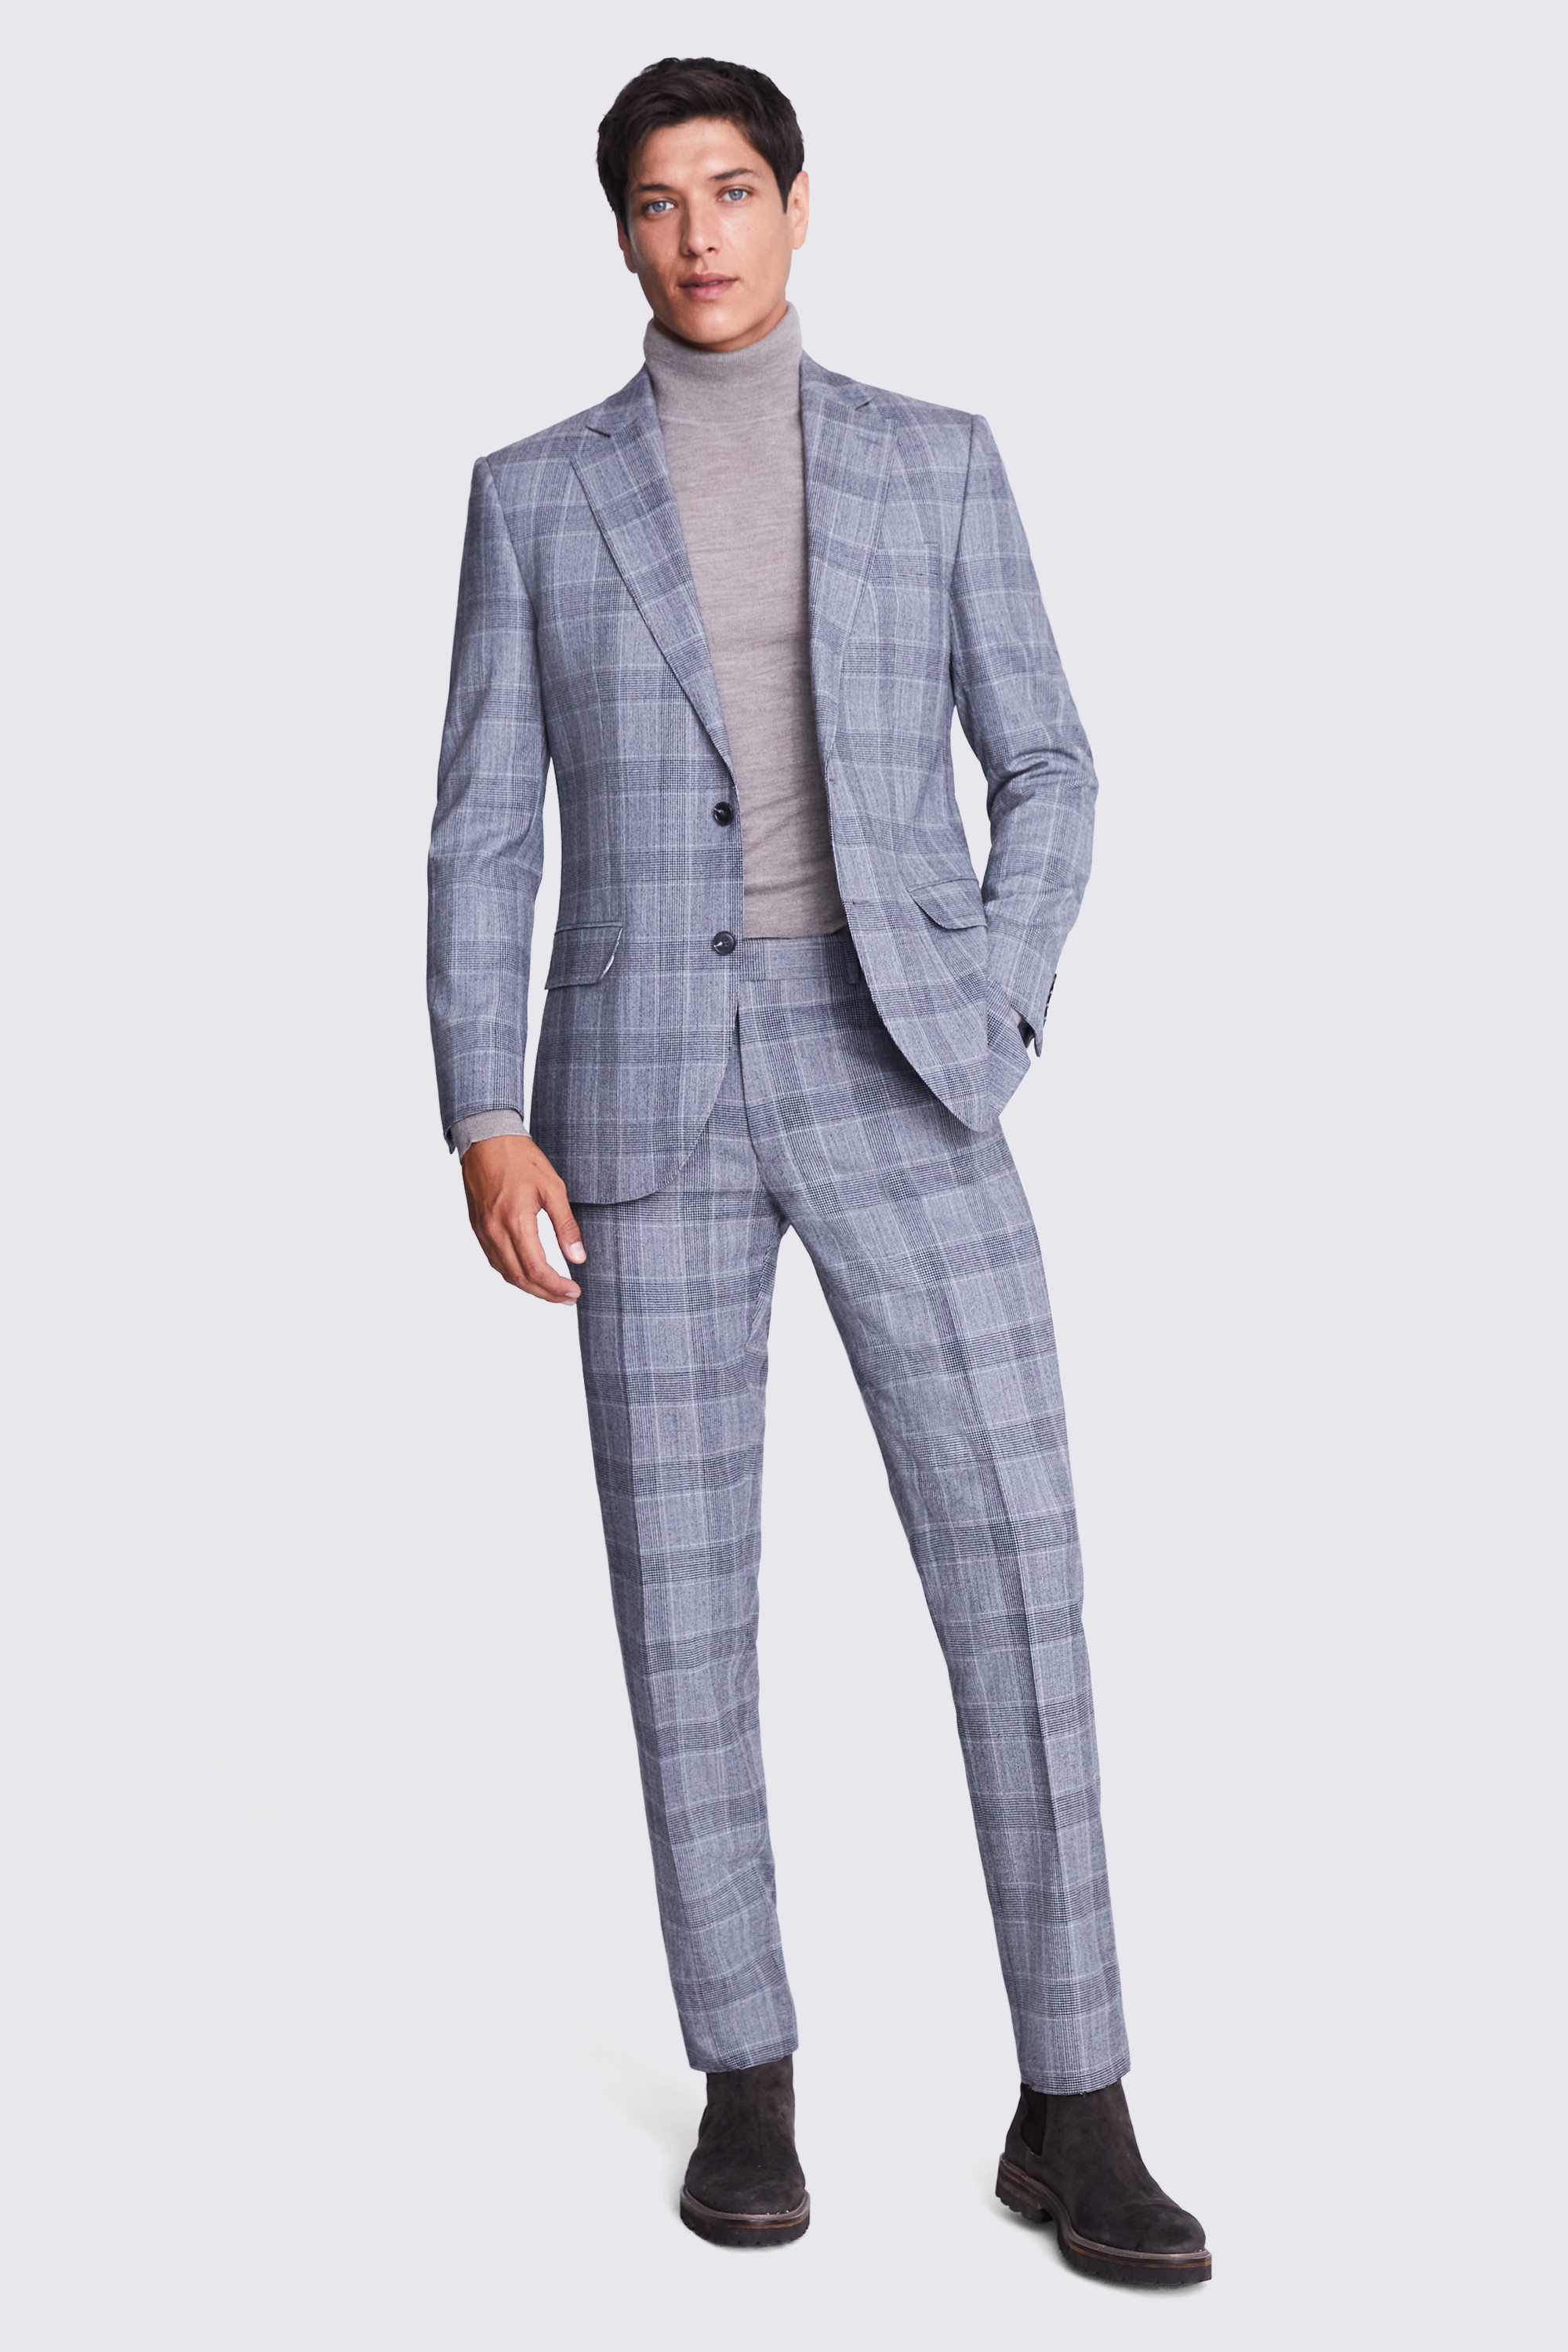 Tailored Fit Light Grey Check Performance Jacket | Buy Online at Moss